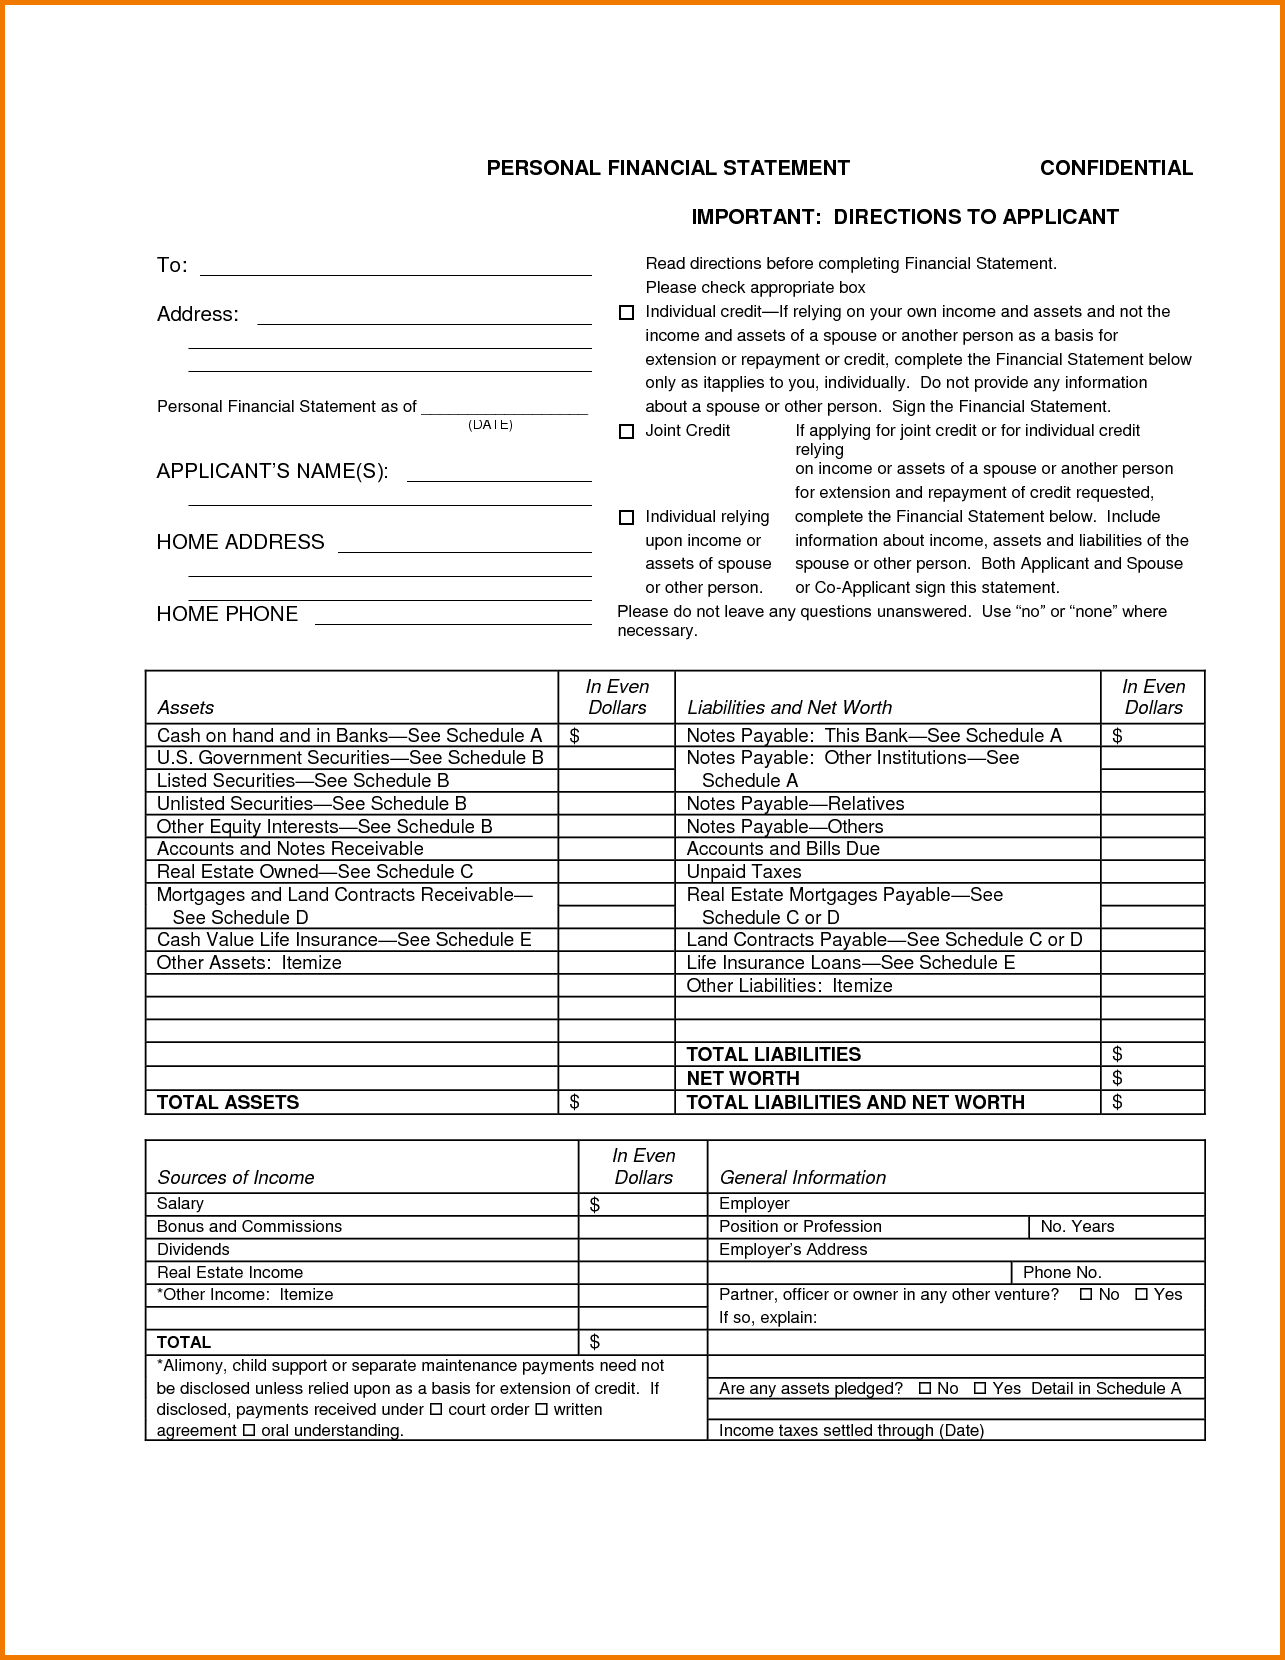 Sample Personal Financial Statement Template And Personal Financial Statement Template Wells Fargo